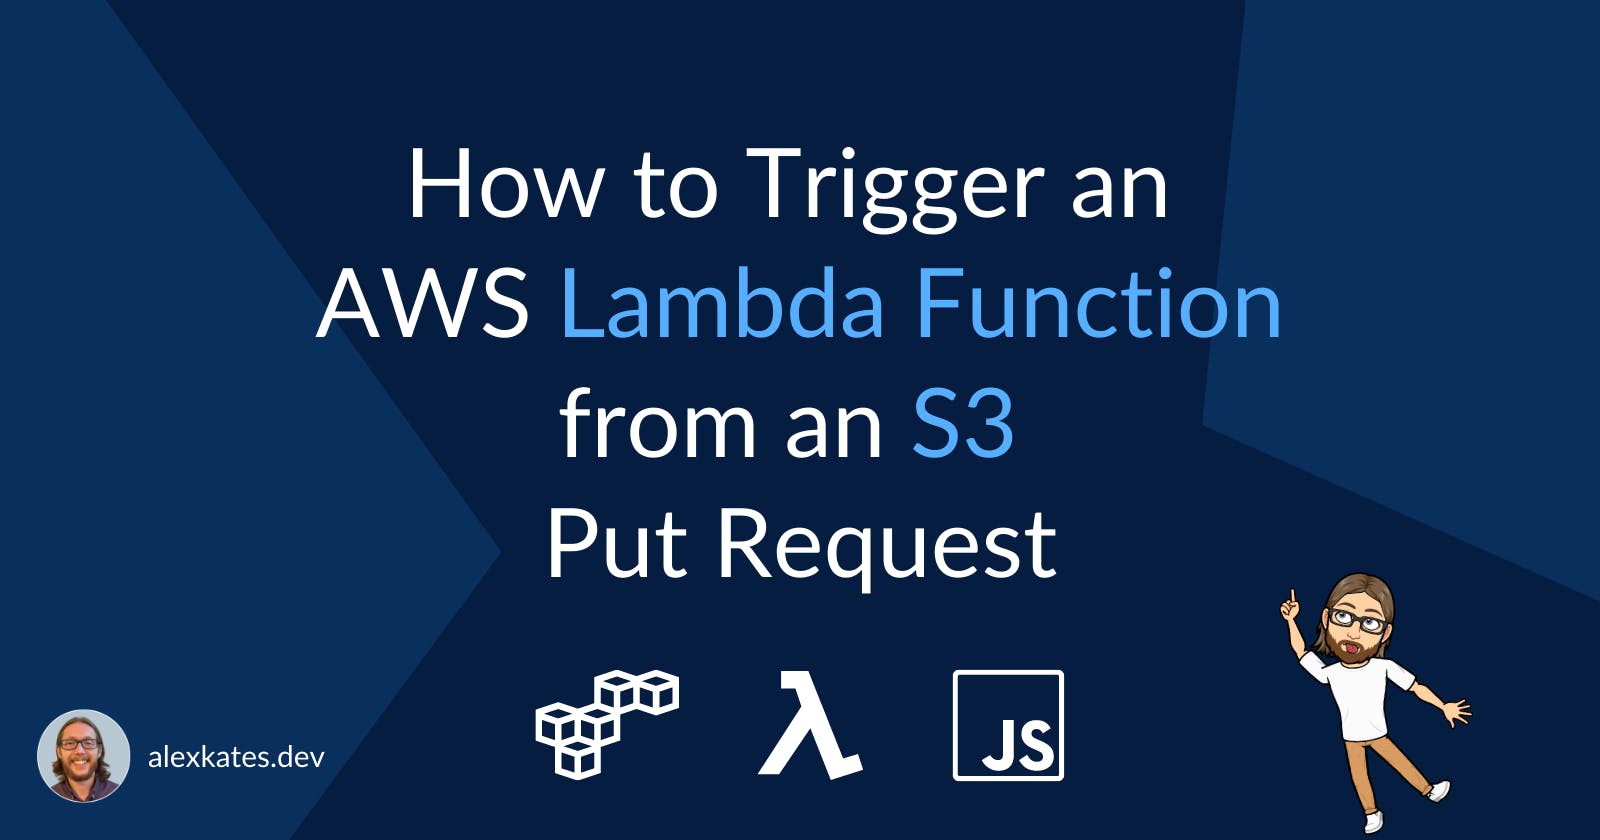 How to Trigger an AWS Lambda Function from an S3 Put Event